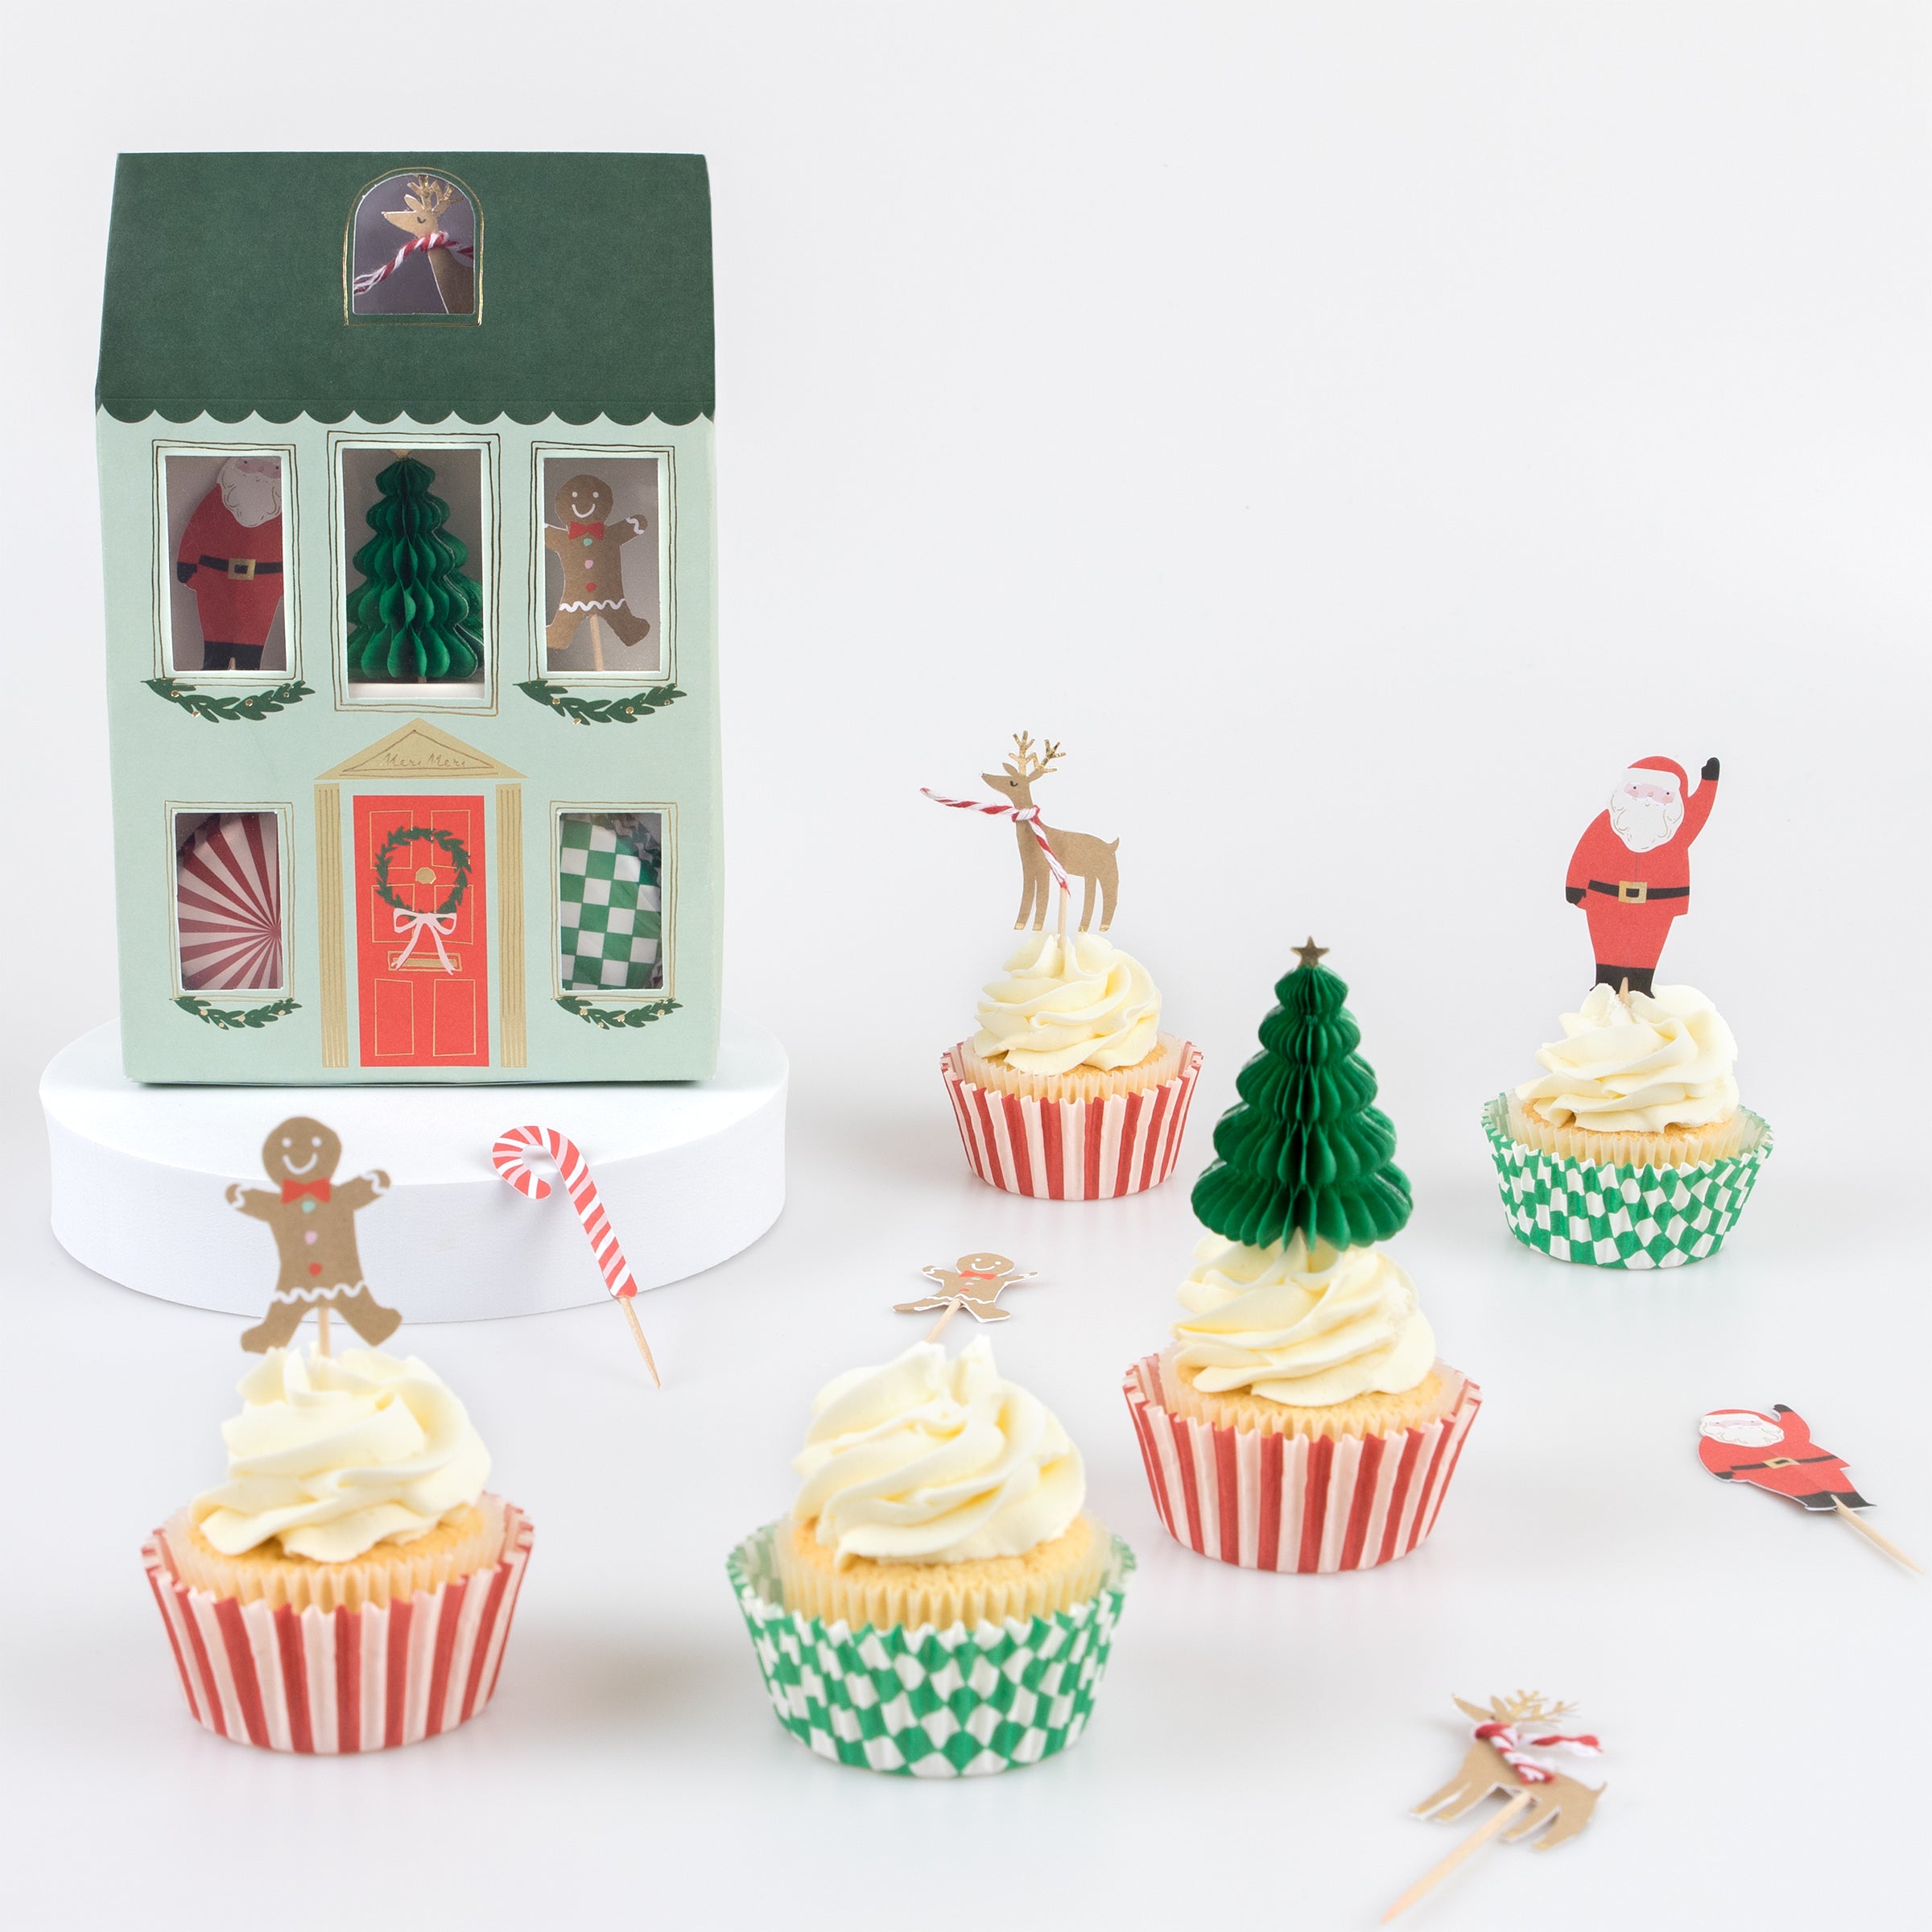 Make Christmas cupcakes with our Christmas cake toppers and cupcake cases, in a kit designed to look like a merry festive house.